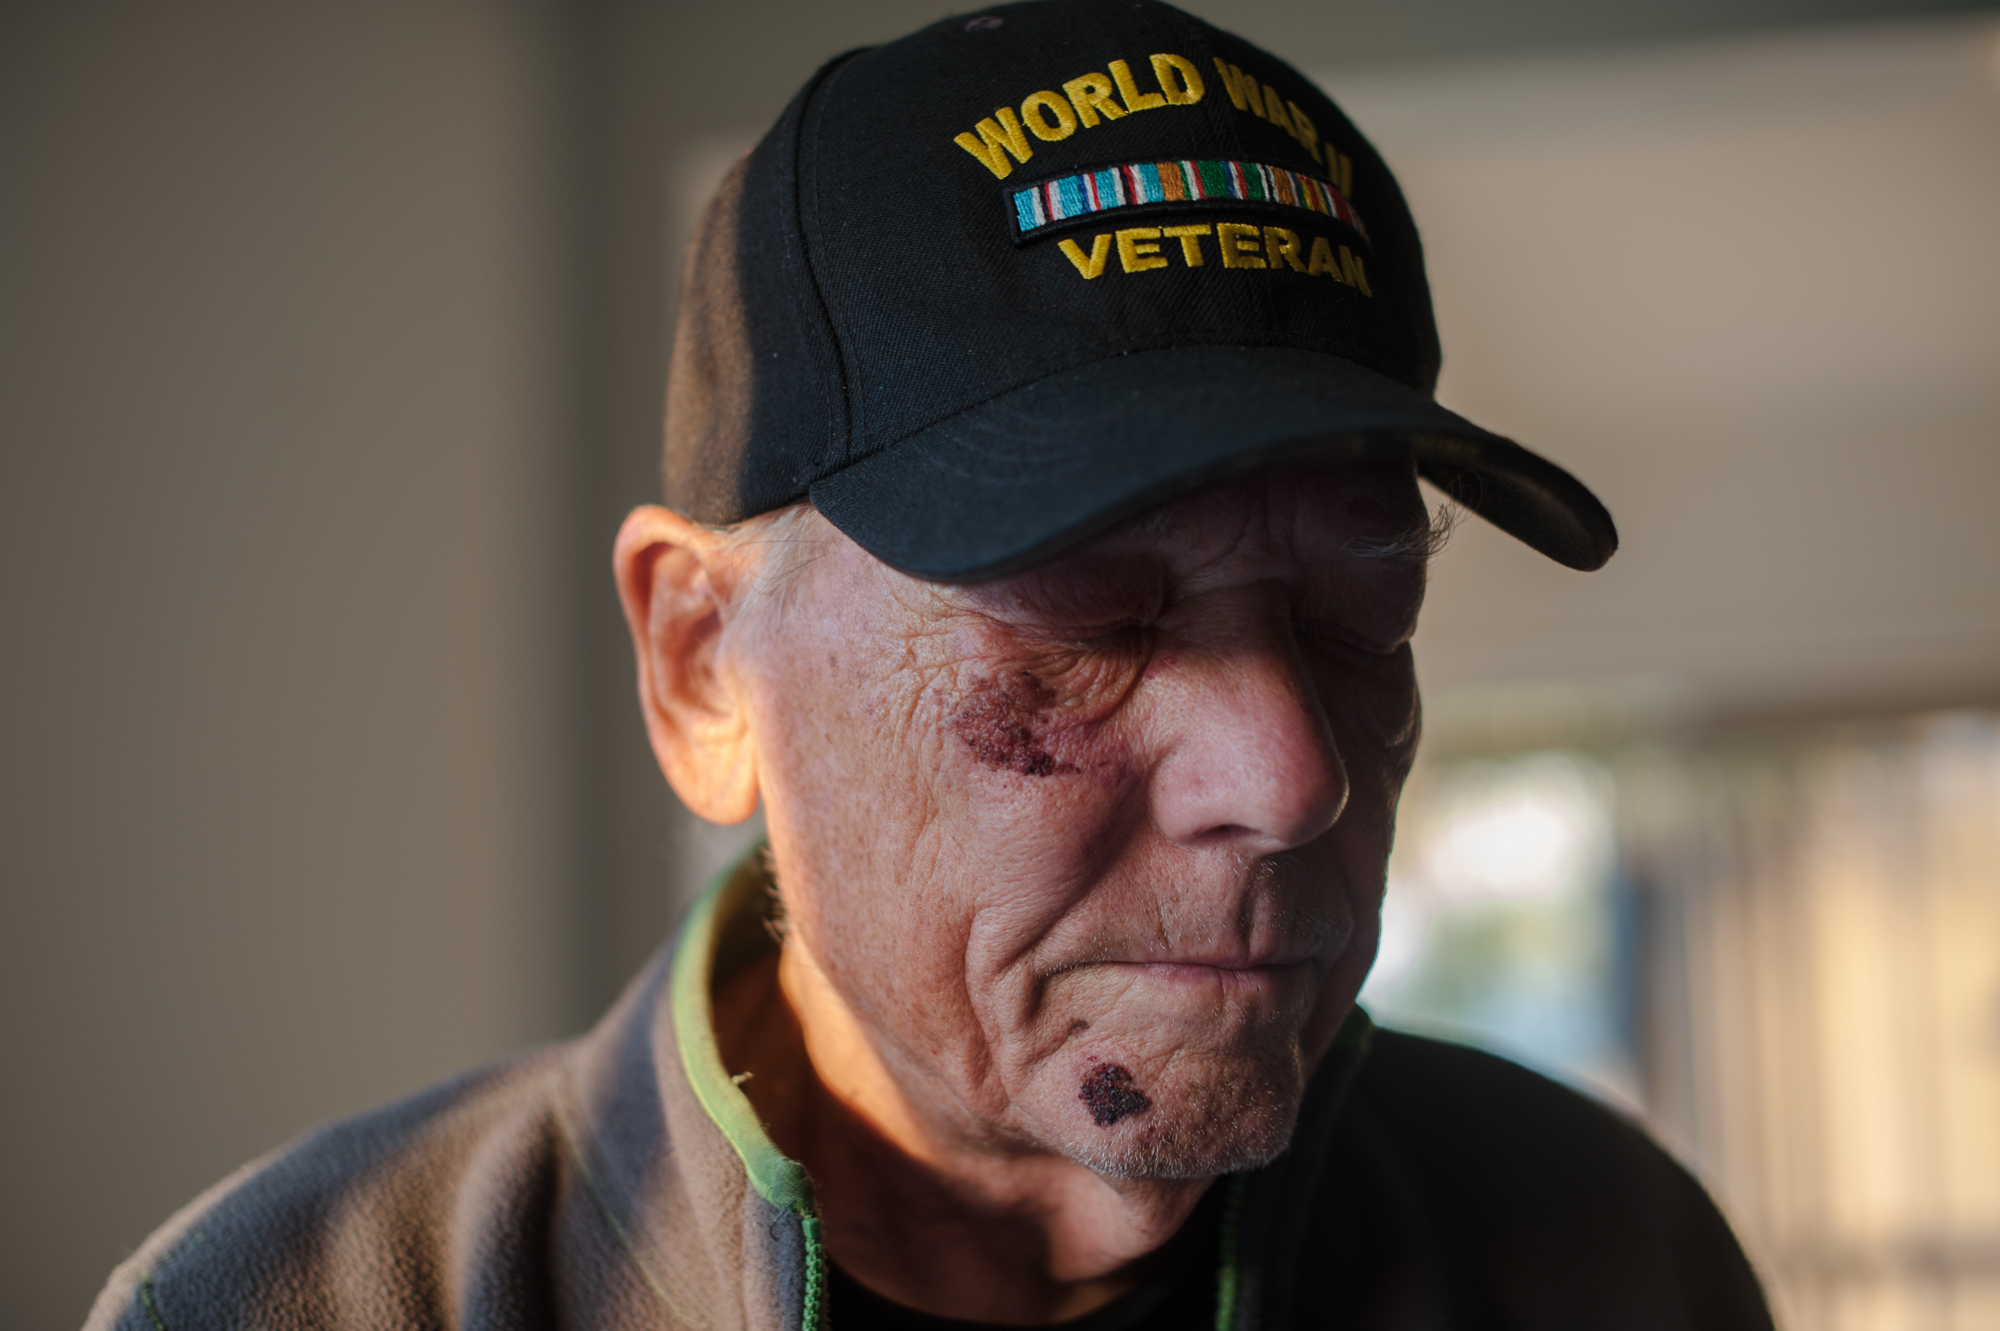  Will stands with his eyes closed, wearing his World War II Veteran cap.  